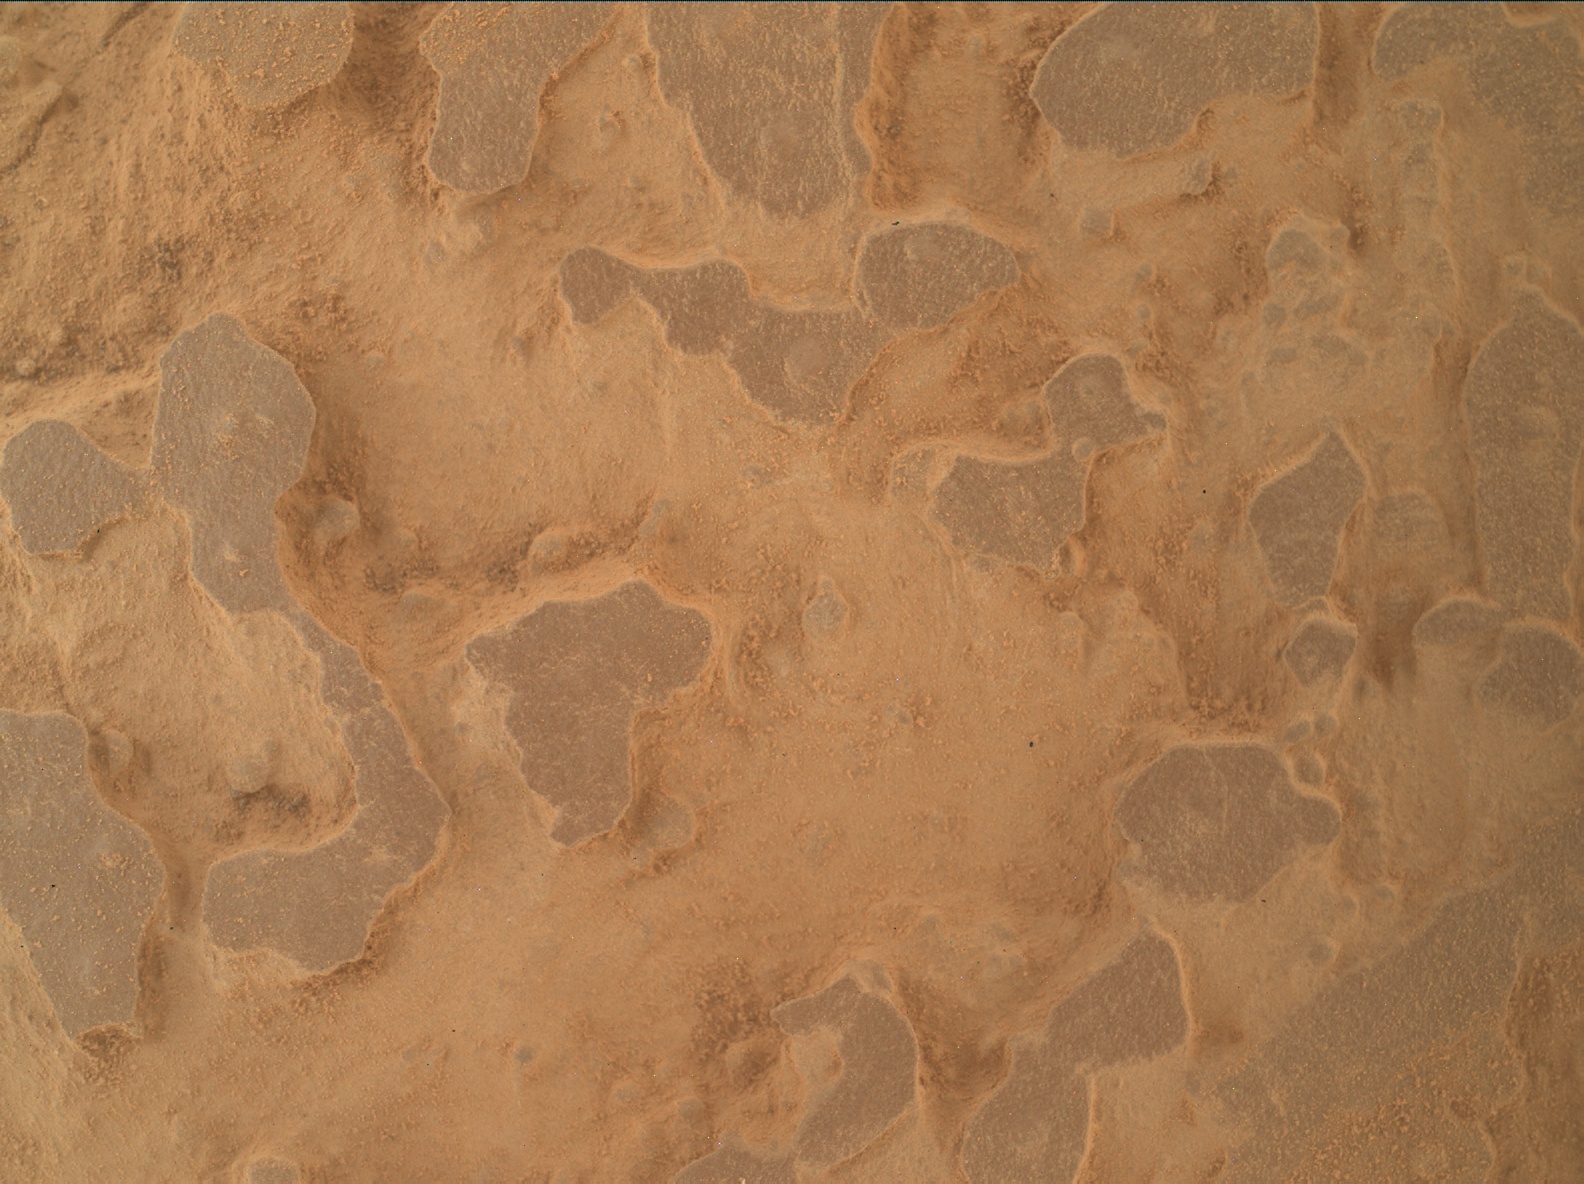 Nasa's Mars rover Curiosity acquired this image using its Mars Hand Lens Imager (MAHLI) on Sol 3948